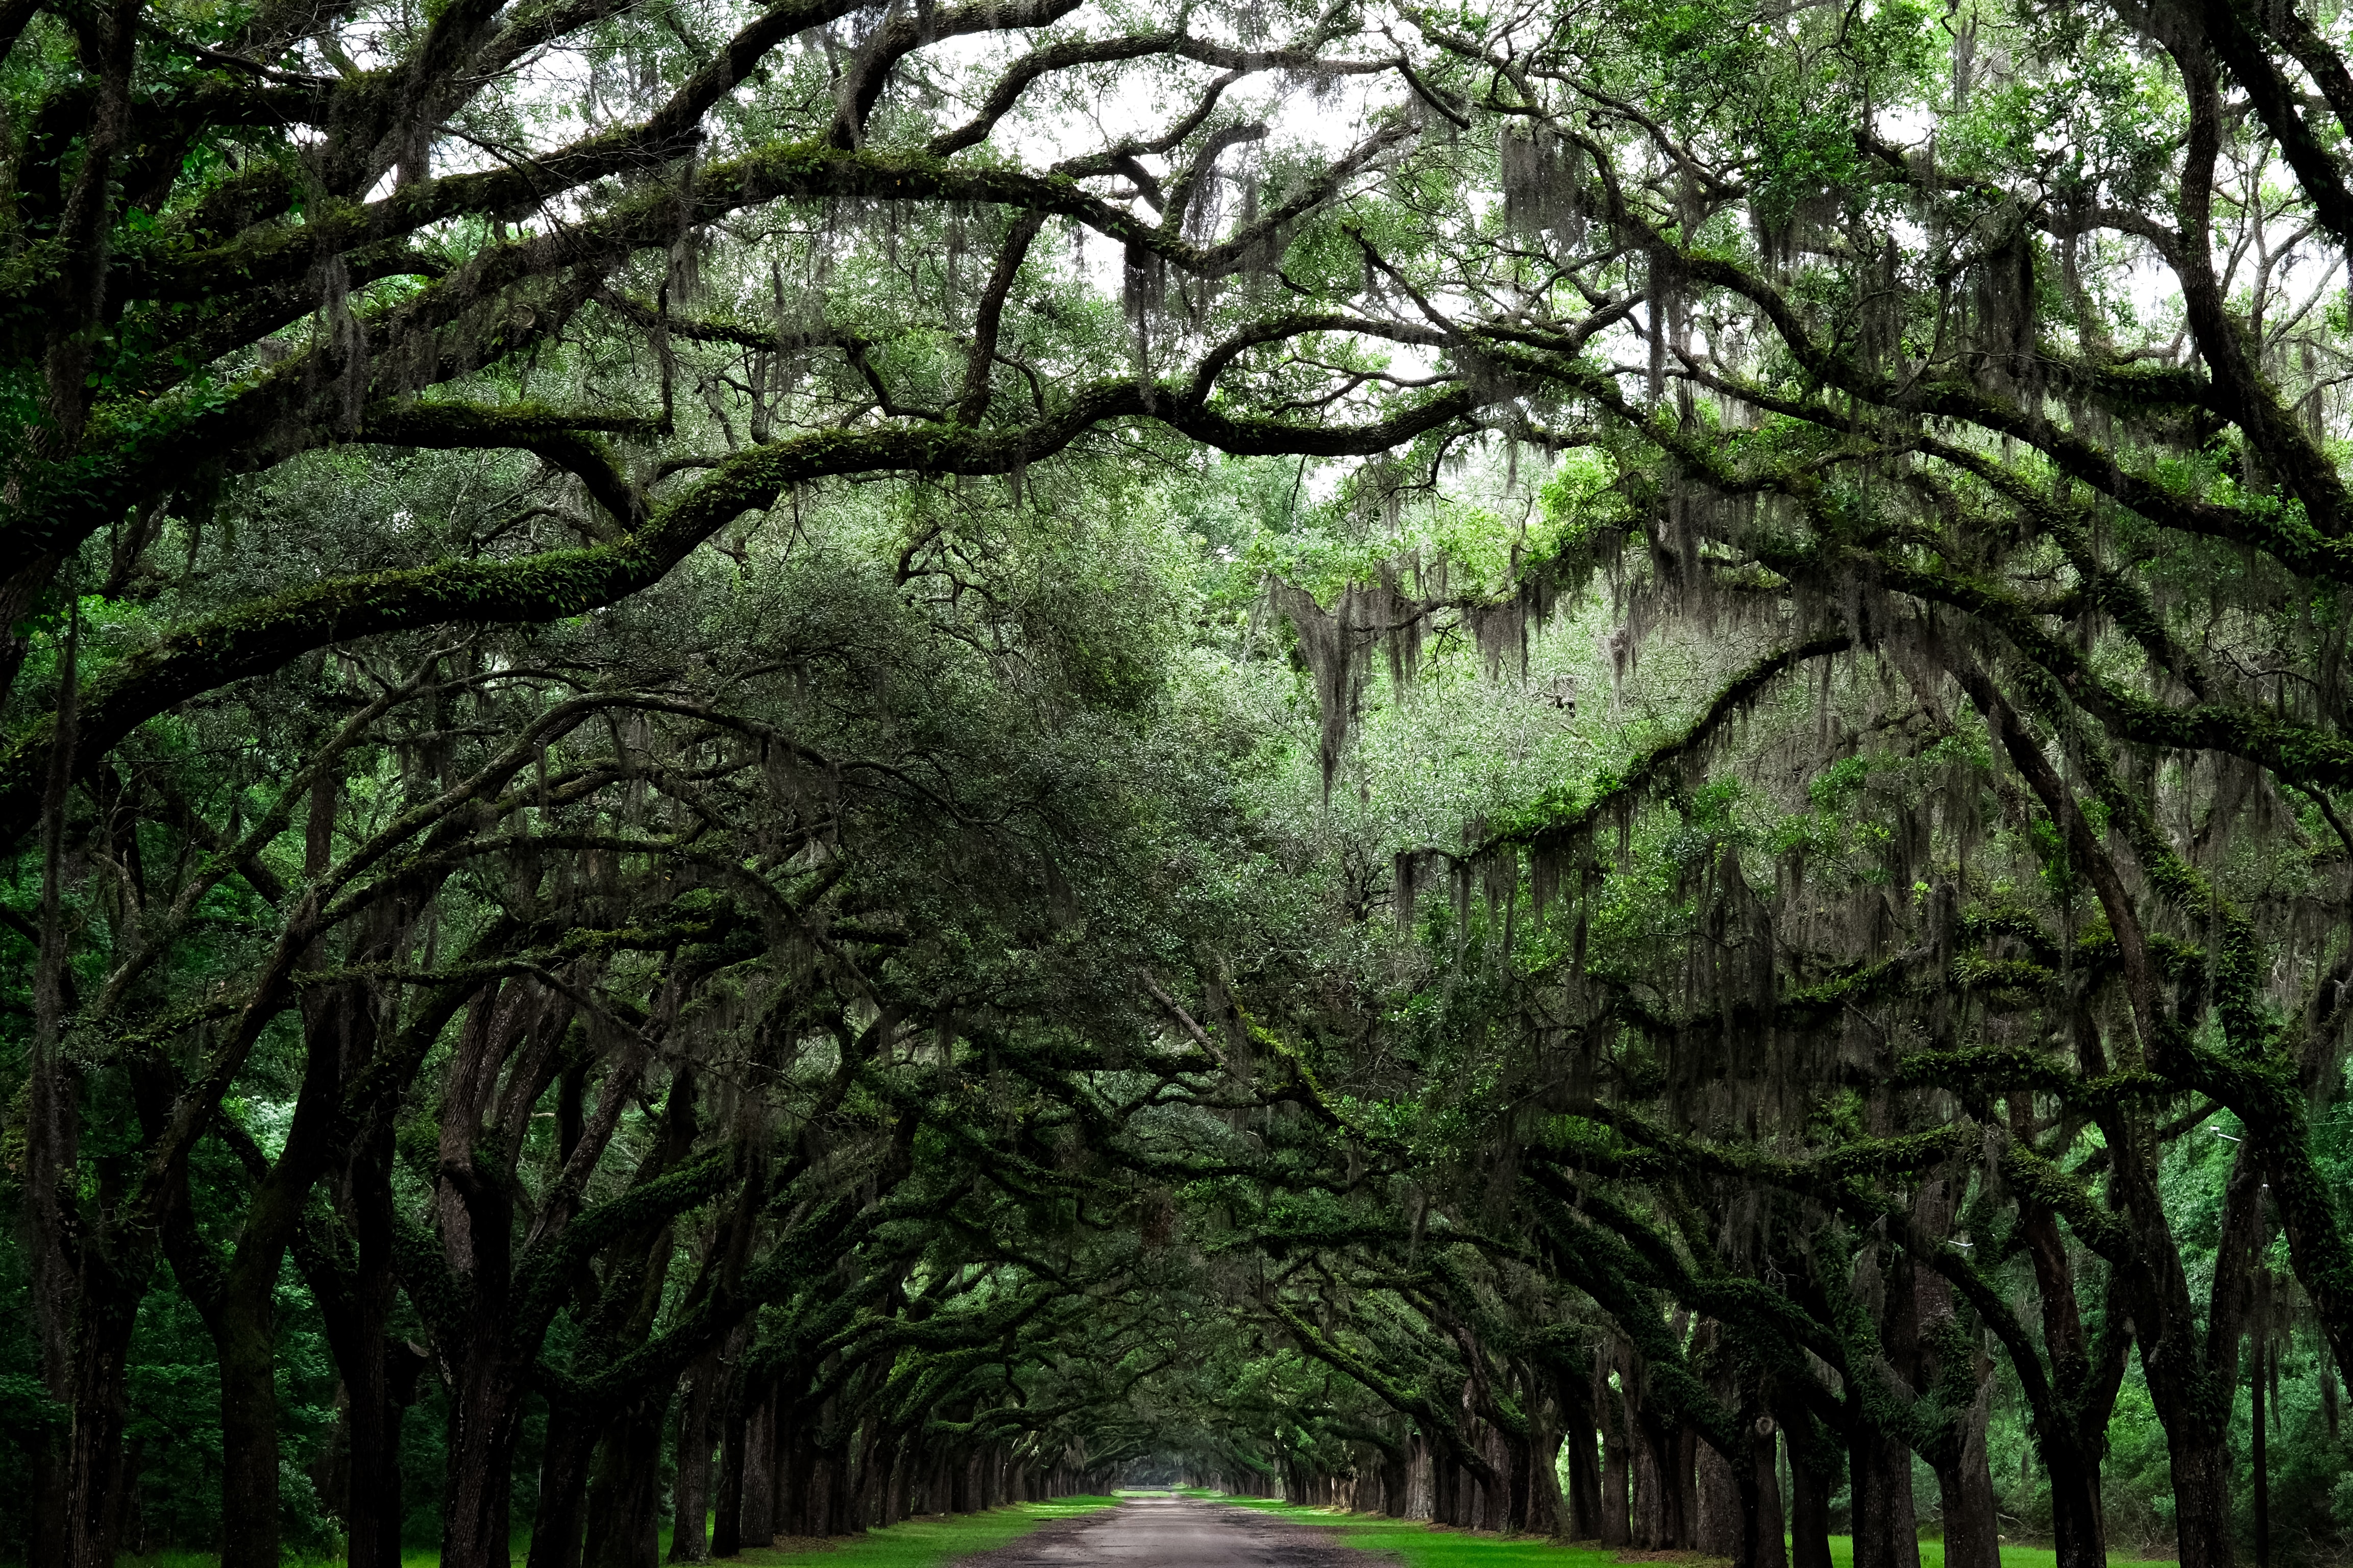 A dirt road shaded by oak trees growing Spanish moss